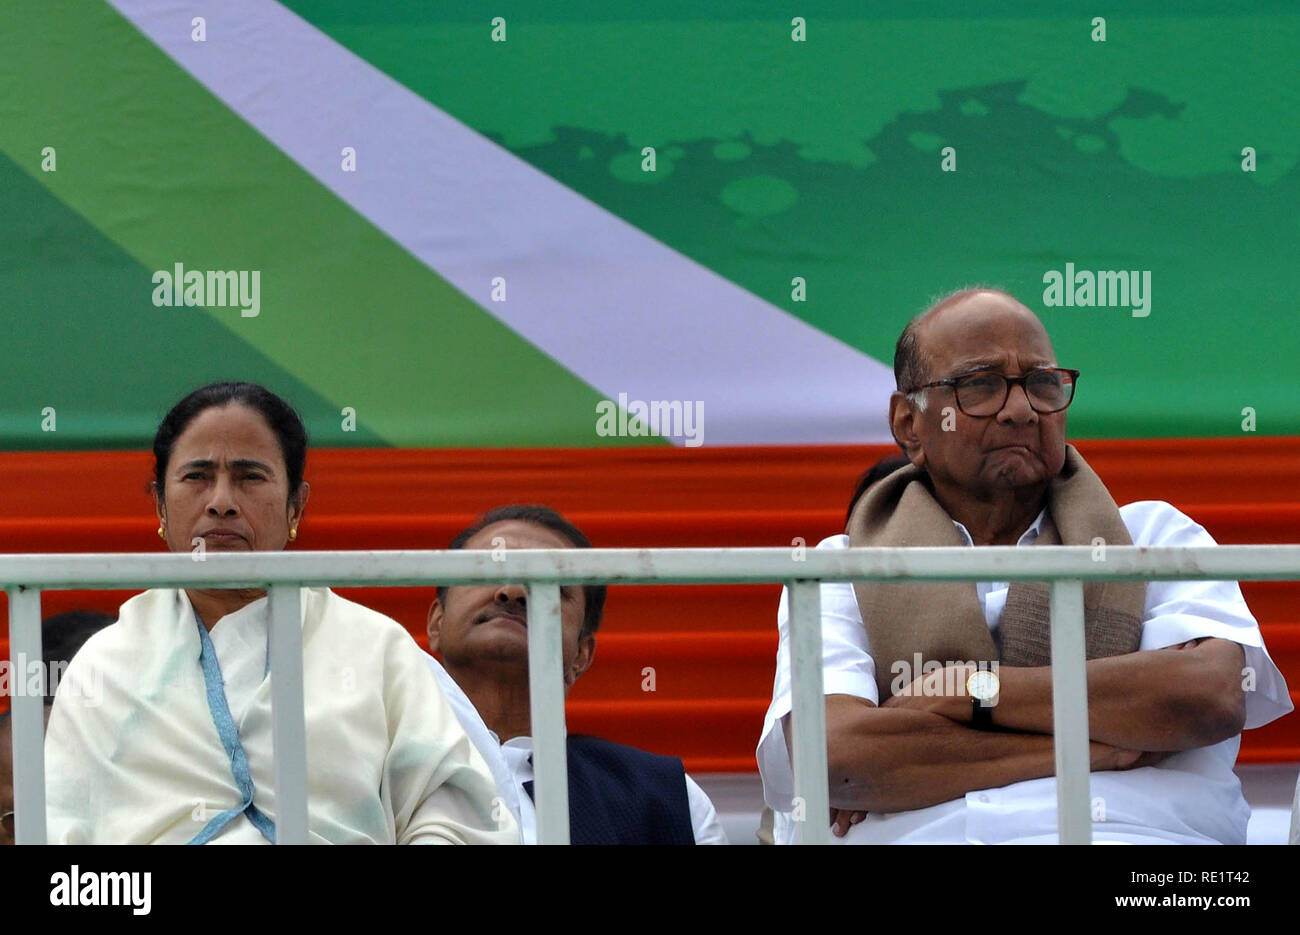 Kolkata, India. 19th Jan, 2019. West Bengal Chief Minister and All India Trinamool Congress or AITMC chief Mamata Banerjee (left) along with National Congress Party or NCP leader Sharad Pawar (right) during the All India Trinamool Congress or AITMC Mega Brigade rally. Credit: Saikat Paul/Pacific Press/Alamy Live News Stock Photo